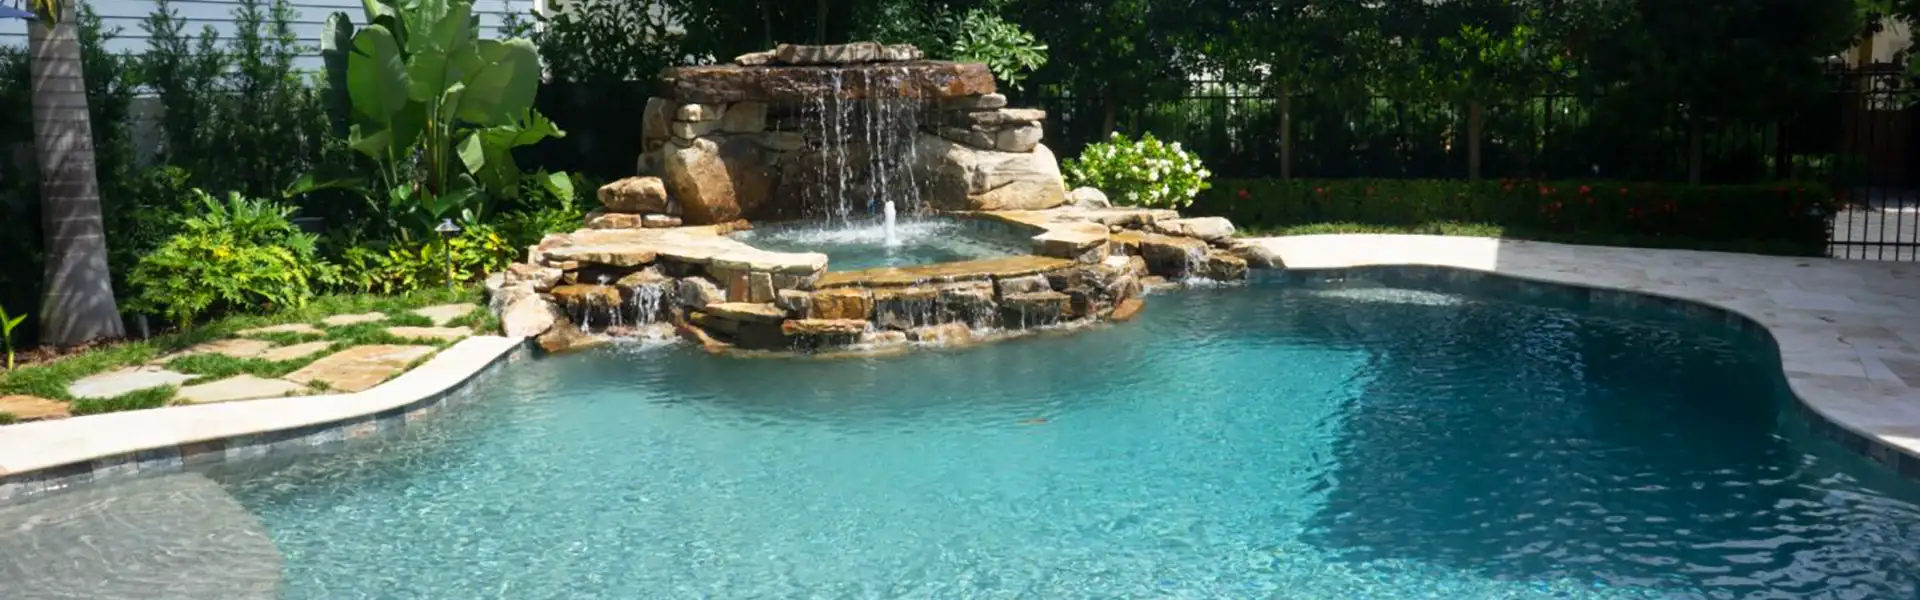 Planning Your Dream Pool: Waterfalls, Fountains, and More